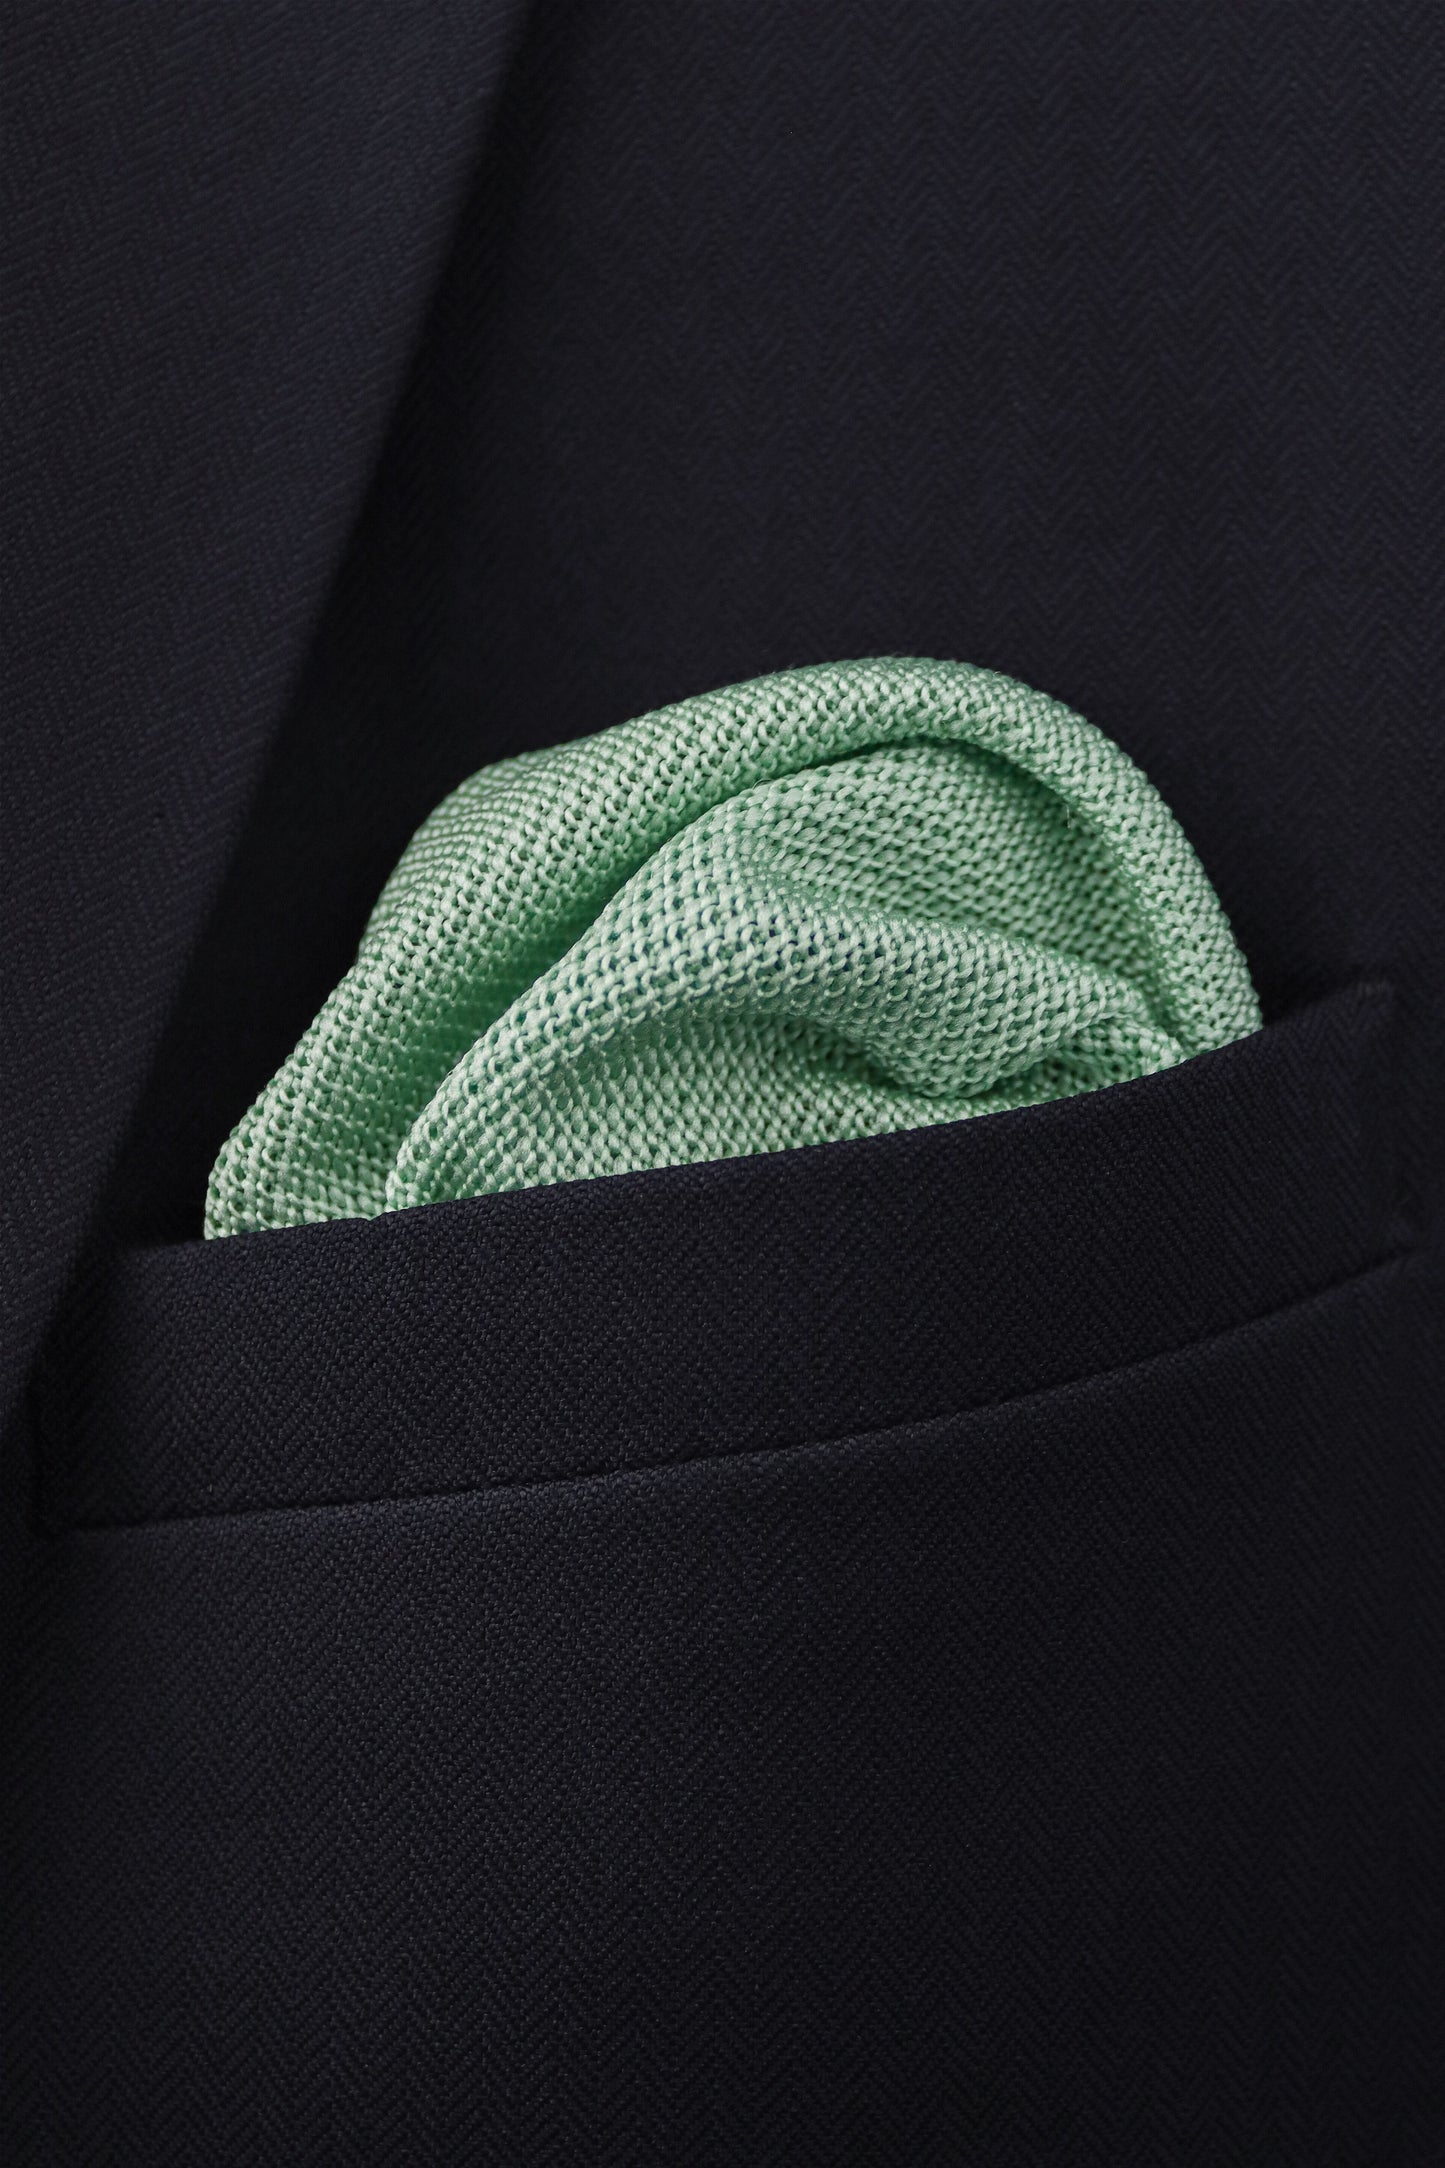 100% Polyester Diamond End Knitted Tie - Sage Green